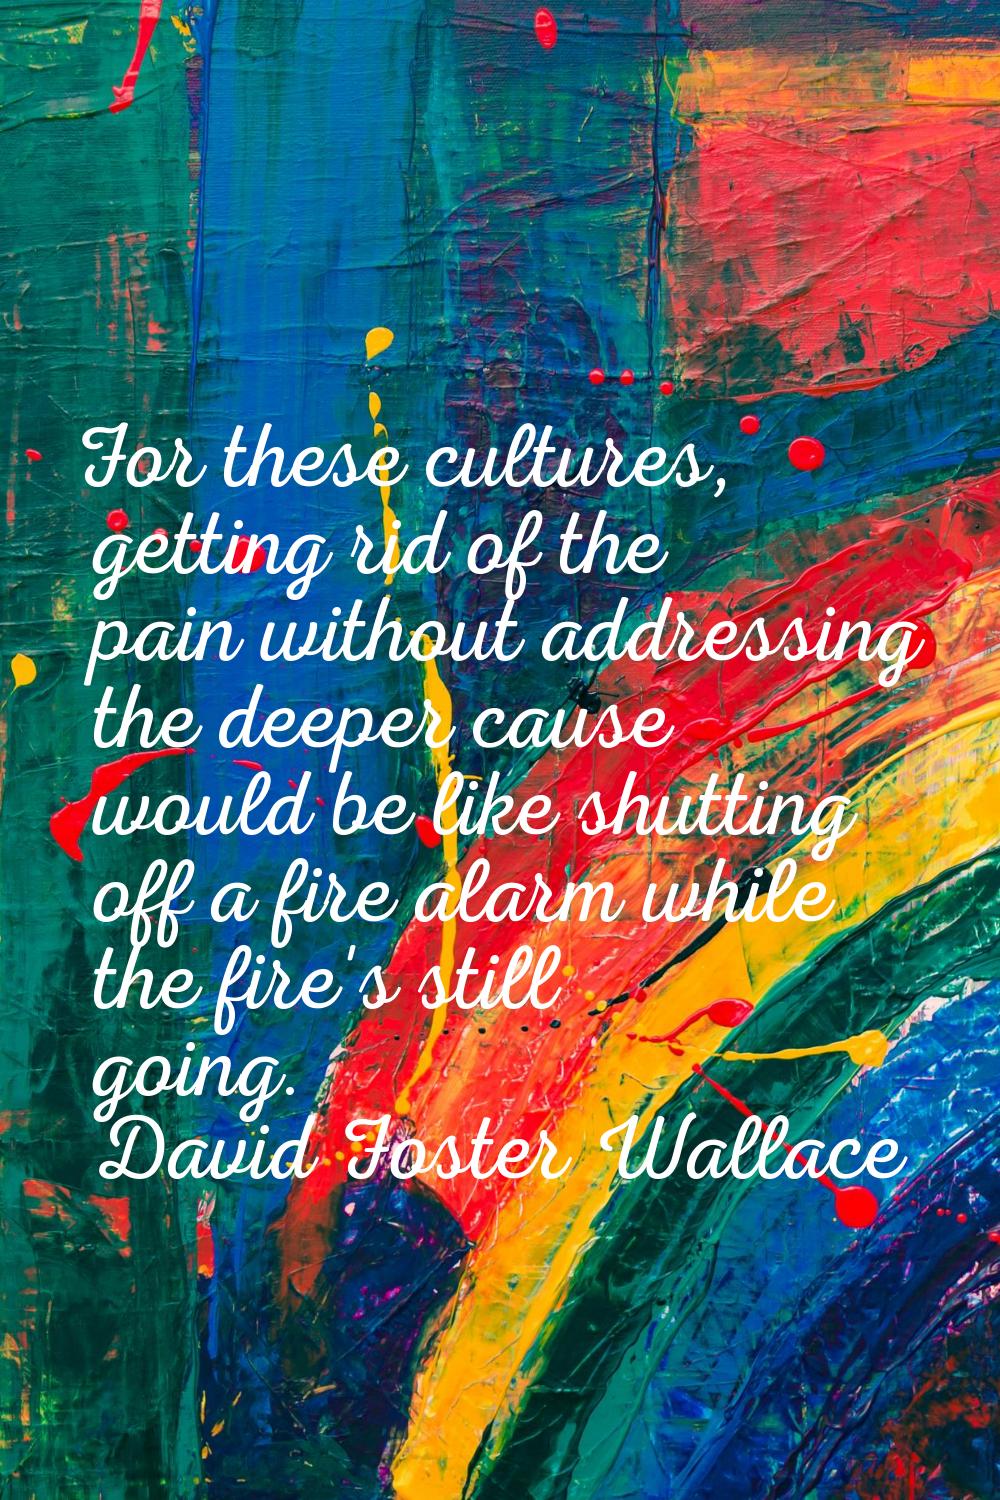 For these cultures, getting rid of the pain without addressing the deeper cause would be like shutt